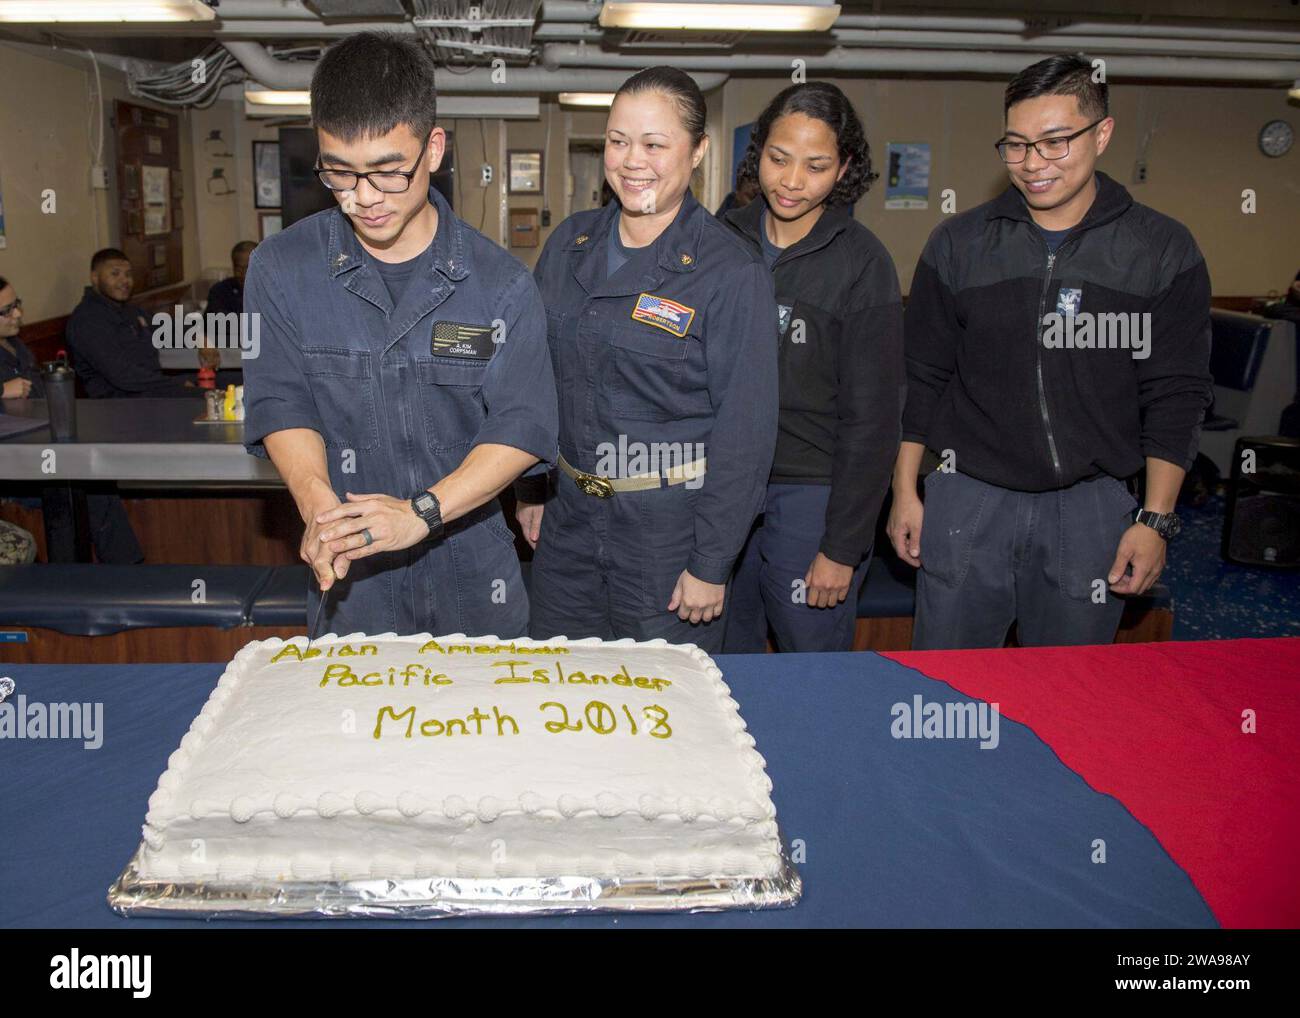 US military forces. 180527PC620-0020  NORTH SEA (May 27, 2018) Hospital Corpsman 2nd Class Andy Kim cuts a cake during an Asian American and Pacific Islander Heritage Month celebration on the mess decks of the Harpers Ferry-class dock landing ship USS Oak Hill (LSD 51) May 27, 2018. Oak Hill, homeported in Virginia Beach, Virginia, is conducting naval operations in the U.S. 6th Fleet area of operations. (U.S. Navy photo by Mass Communication Specialist 3rd Class Michael H. Lehman/Released) Stock Photo